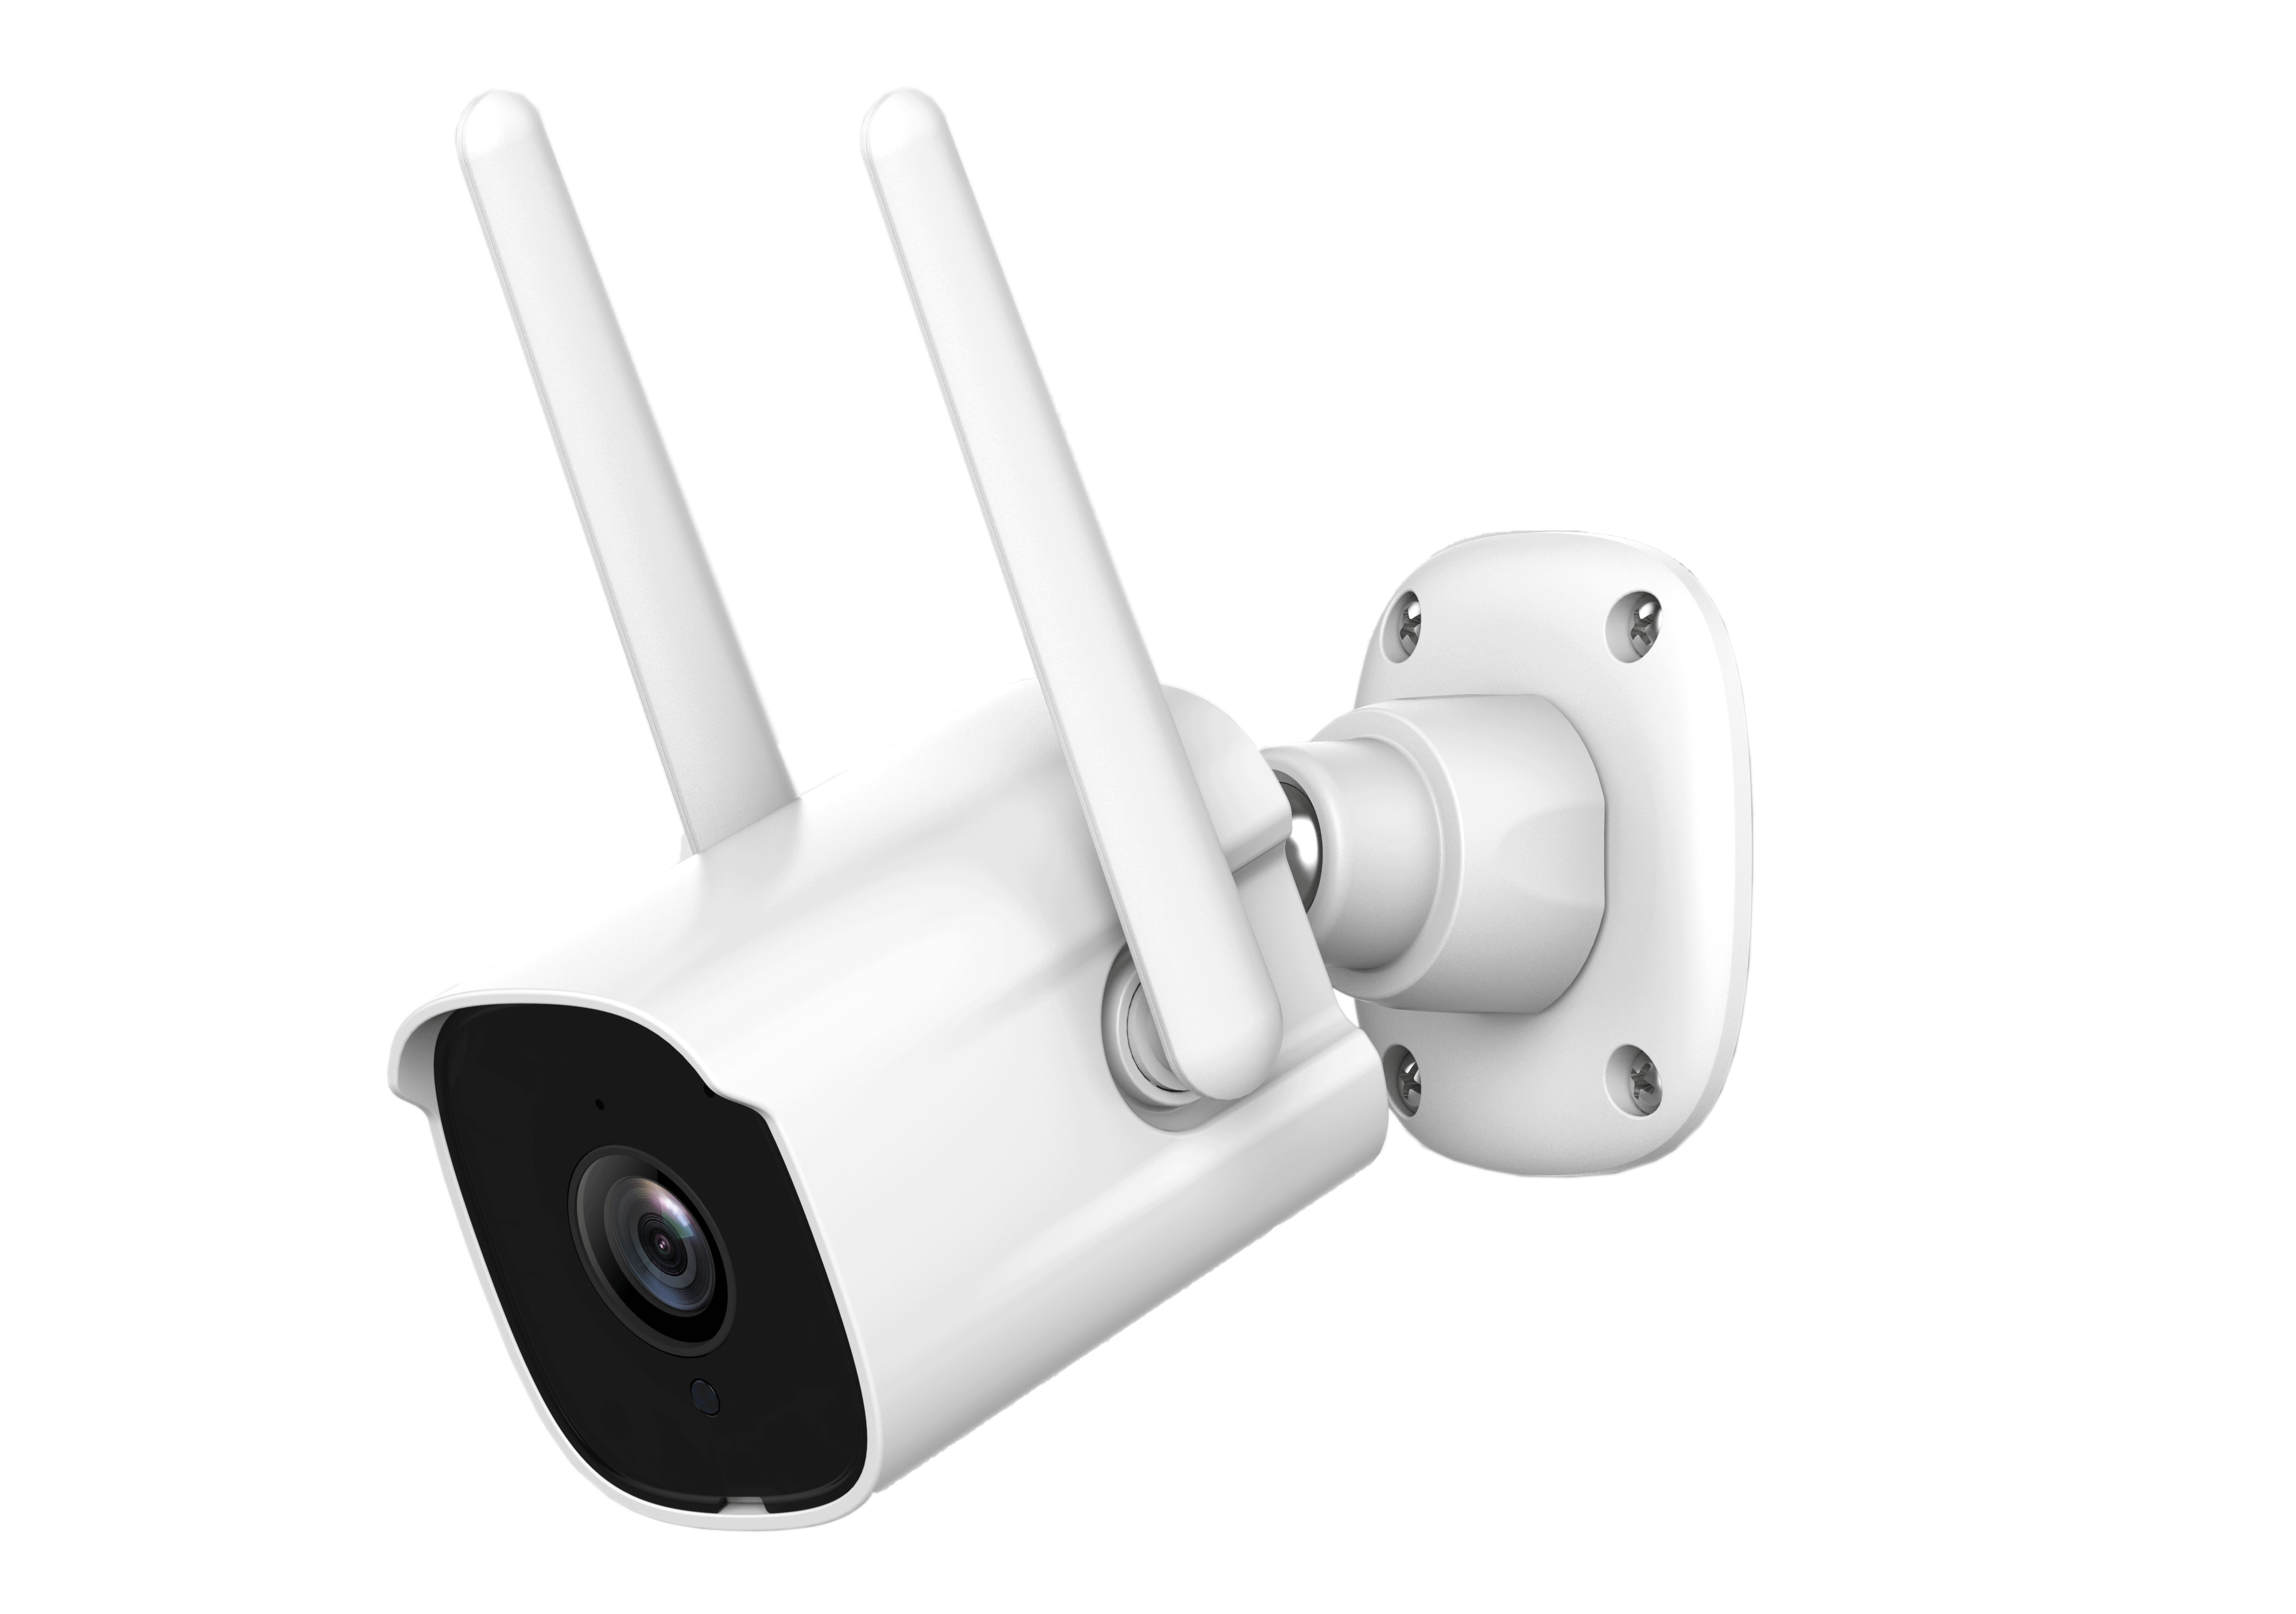 How do multiple users view surveillance cameras